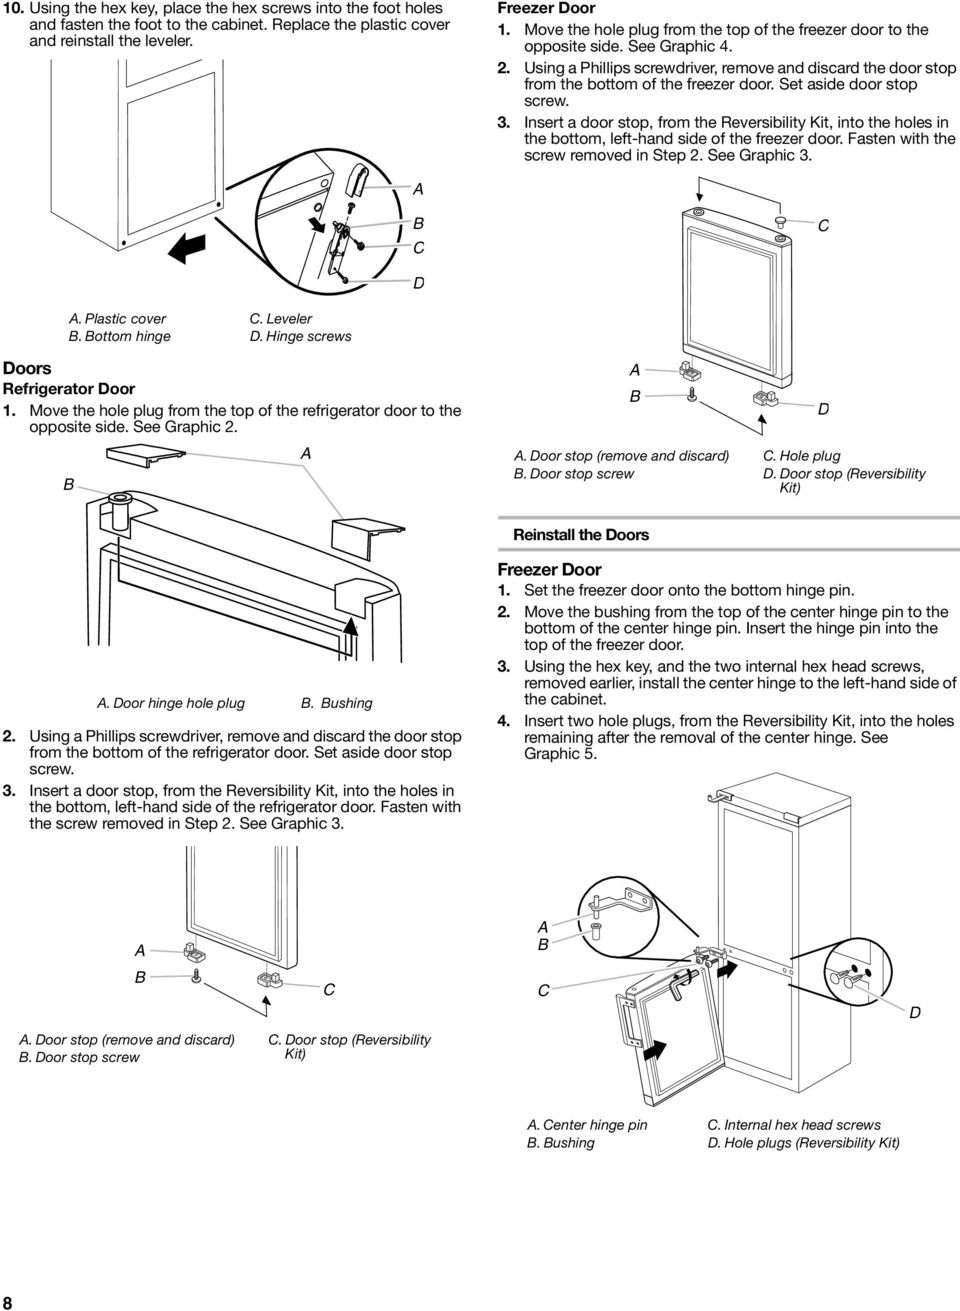 Set aside door stop screw. 3. Insert a door stop, from the Reversibility Kit, into the holes in the bottom, left-hand side of the freezer door. Fasten with the screw removed in Step 2. See Graphic 3.